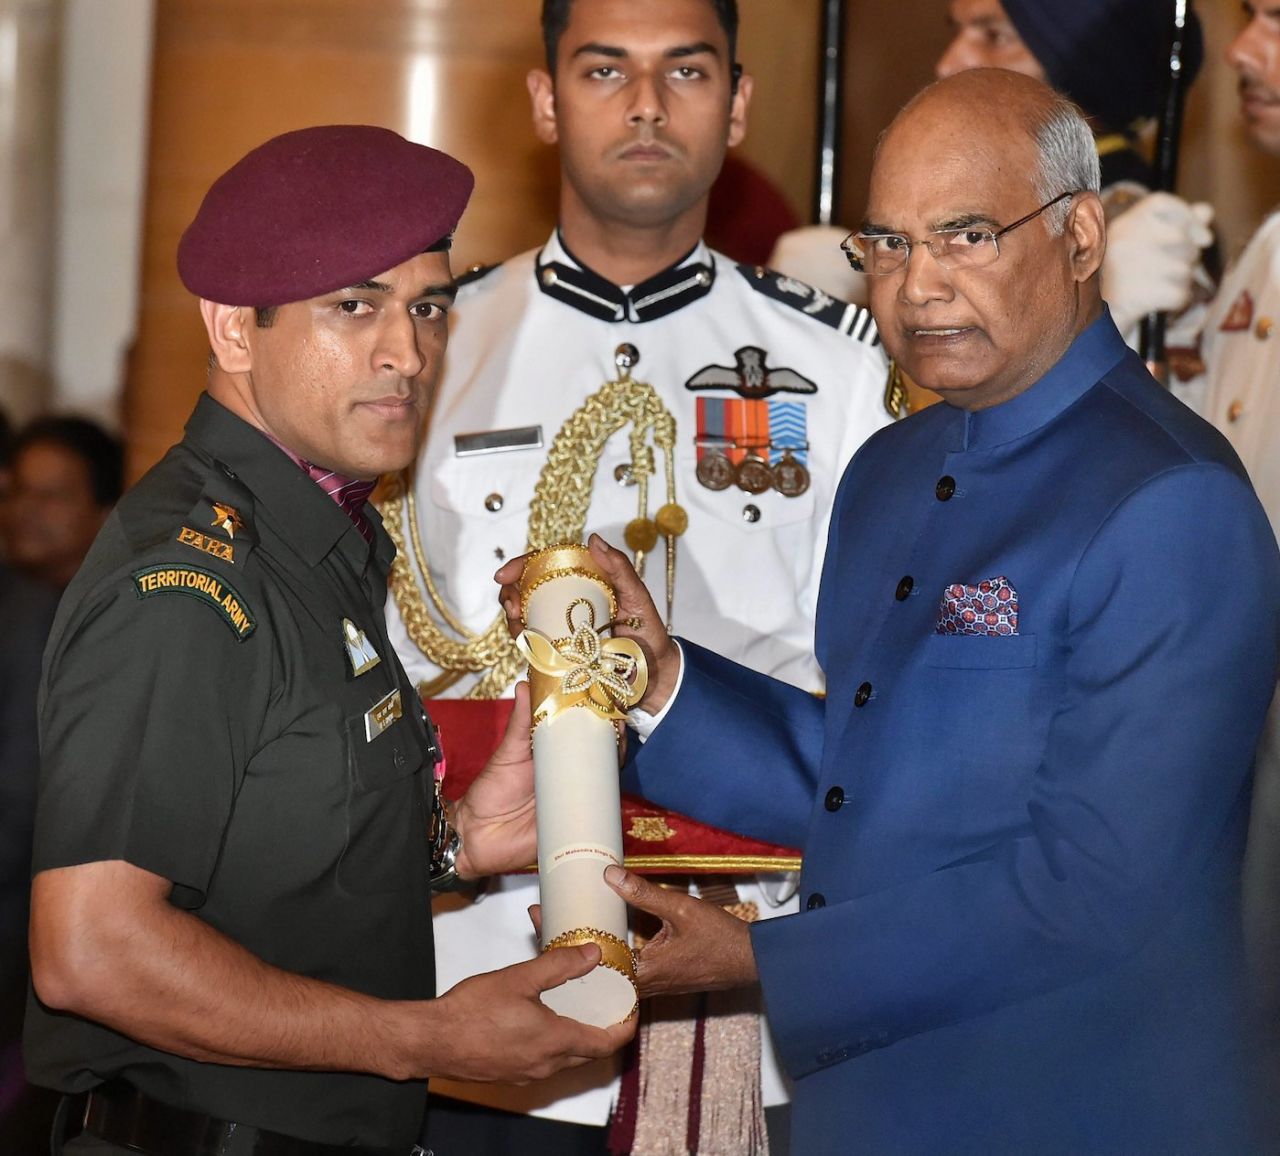 MS Dhoni received the Padma Bhushan award from the President of India, New Delhi, April 2, 2018